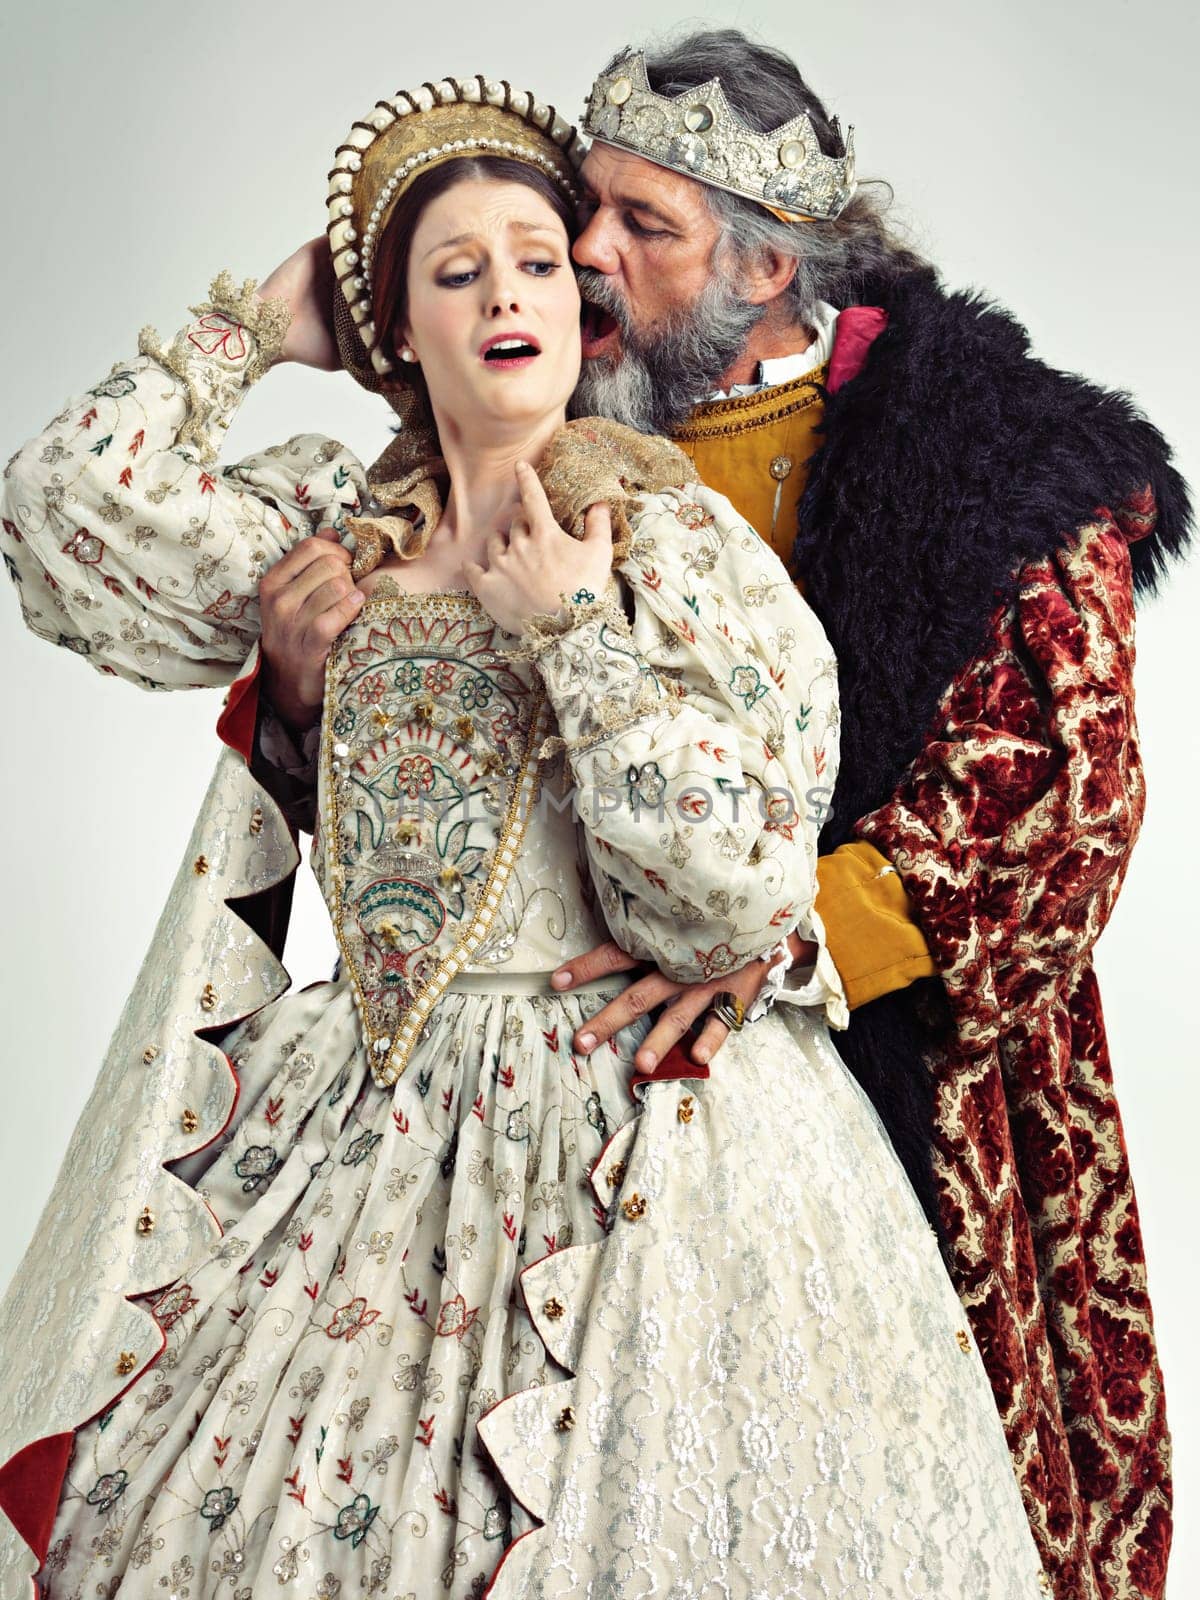 Medieval king, queen and violence in studio for drama, danger and together with renaissance clothes. Ancient royal couple, surprise and shock with distress, crying and actor with vintage fashion by YuriArcurs